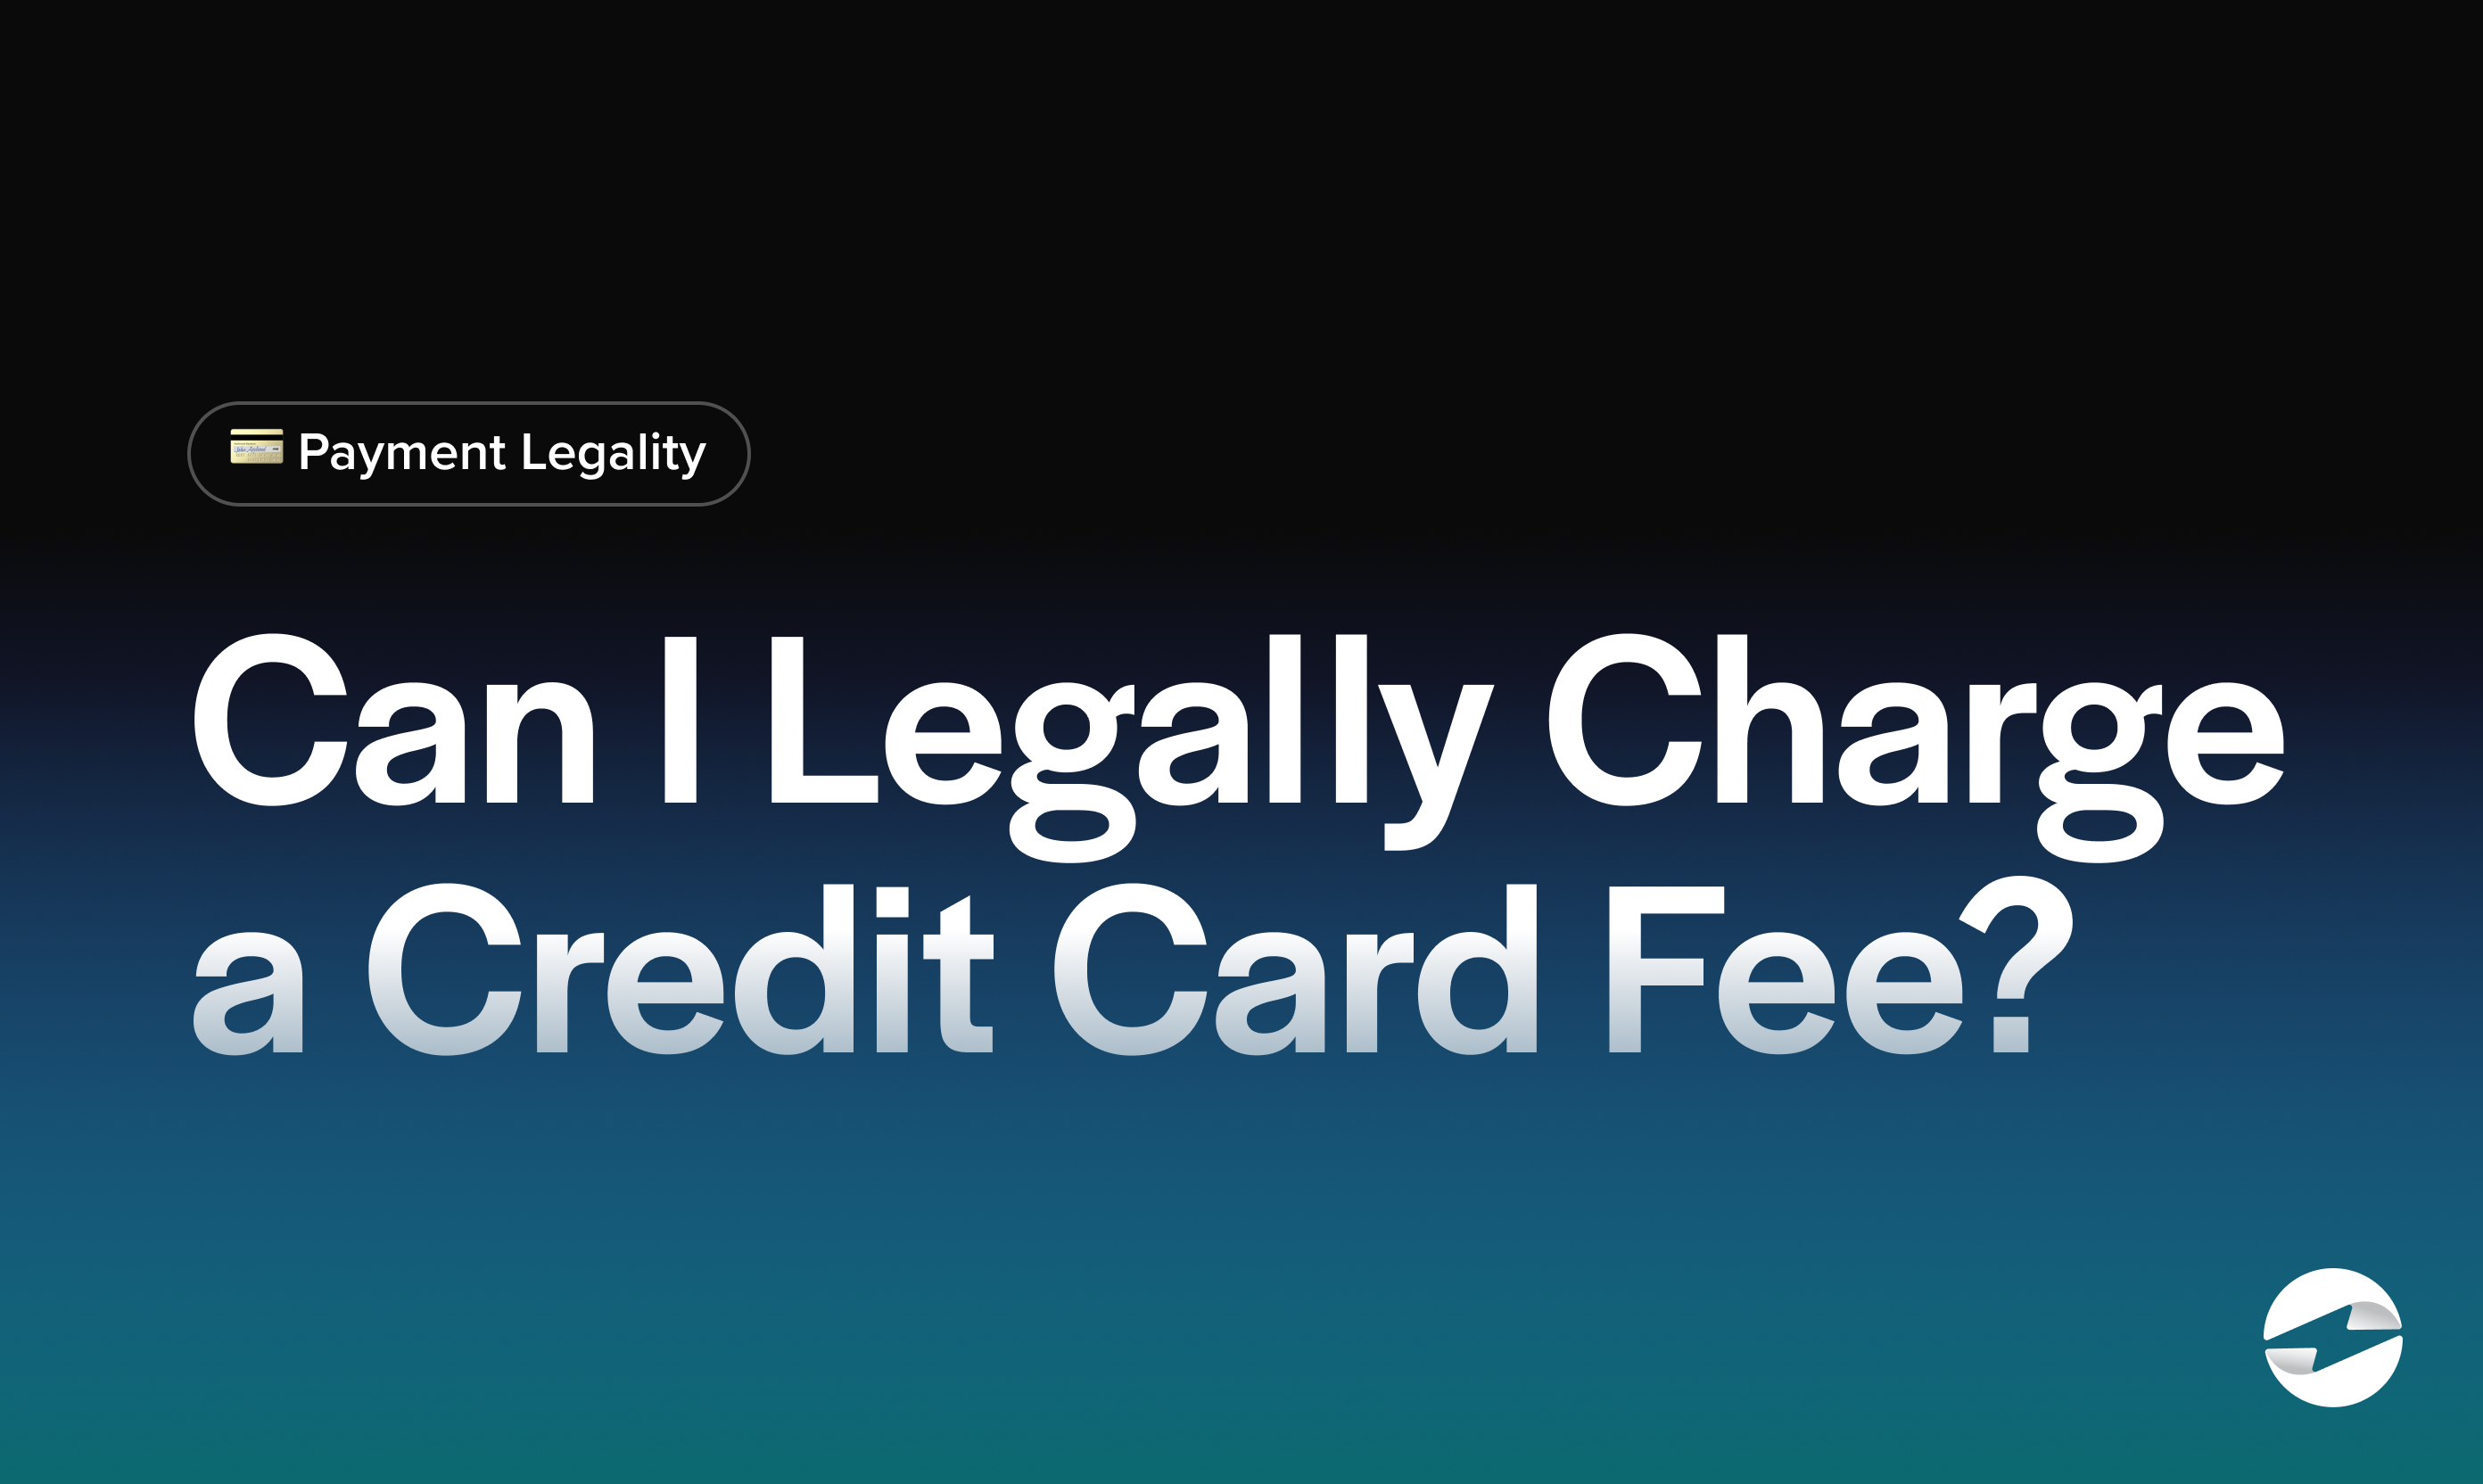 Can I legally charge a credit card fee